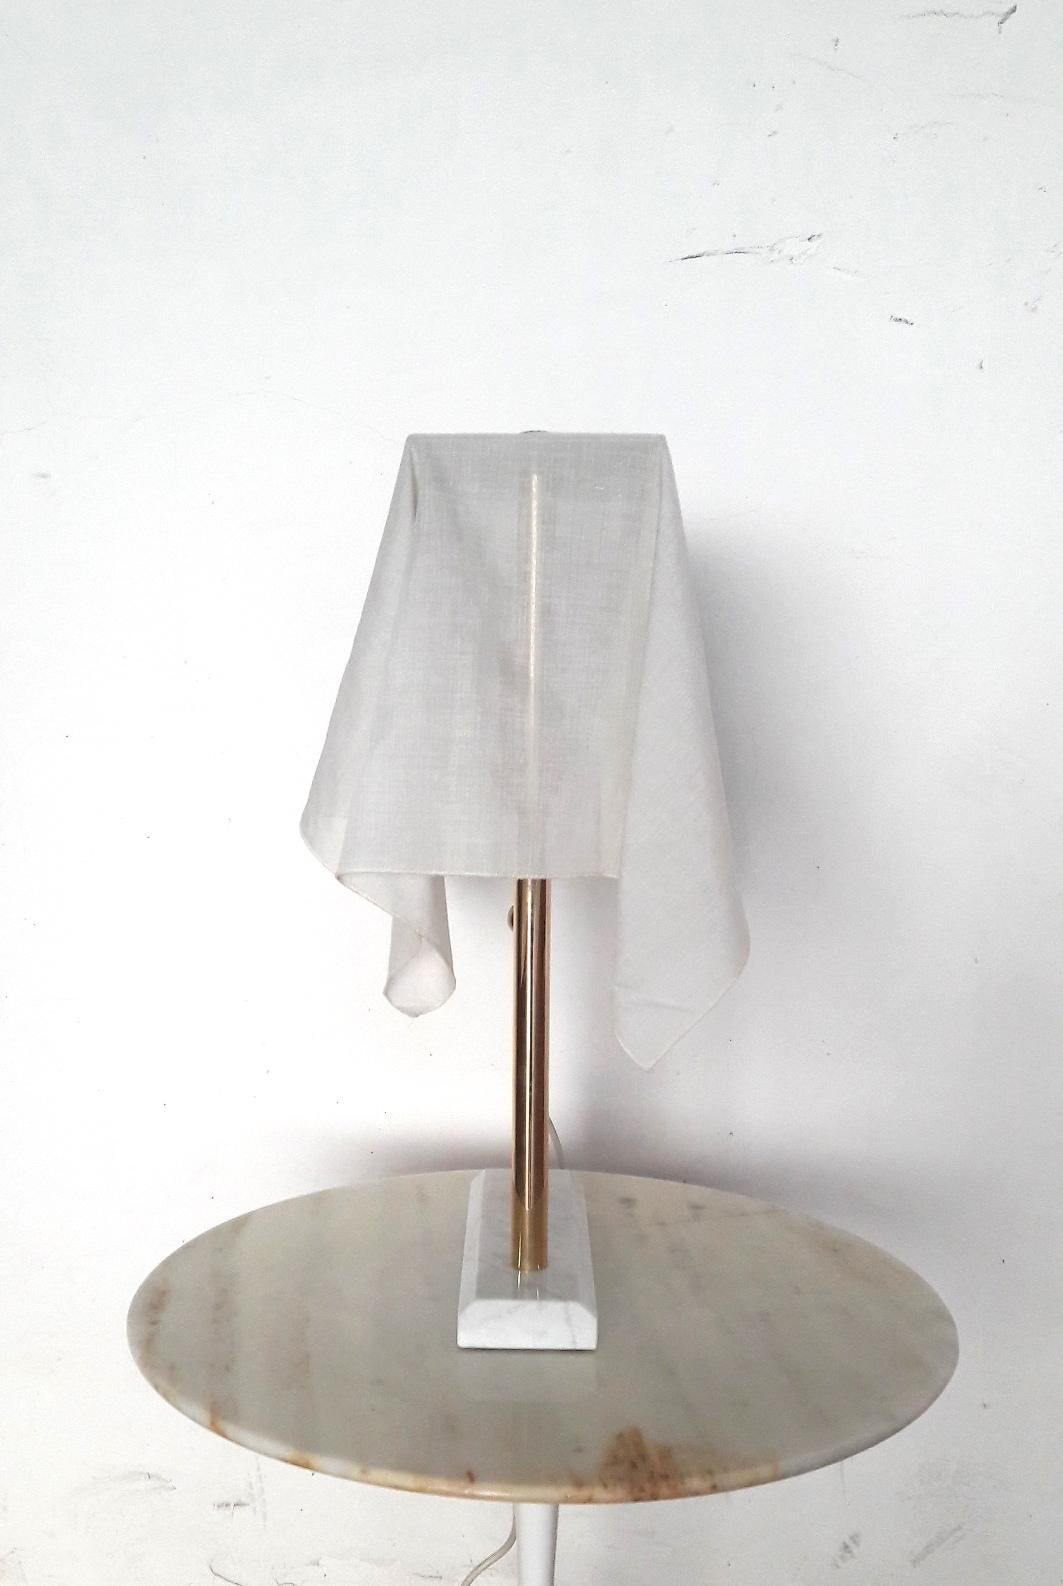 Takahama 'Nefer 1' Modern Golden Table Lamp for Sirrah, Italy, 1980s In Excellent Condition For Sale In Cassina de'Pecchi, IT